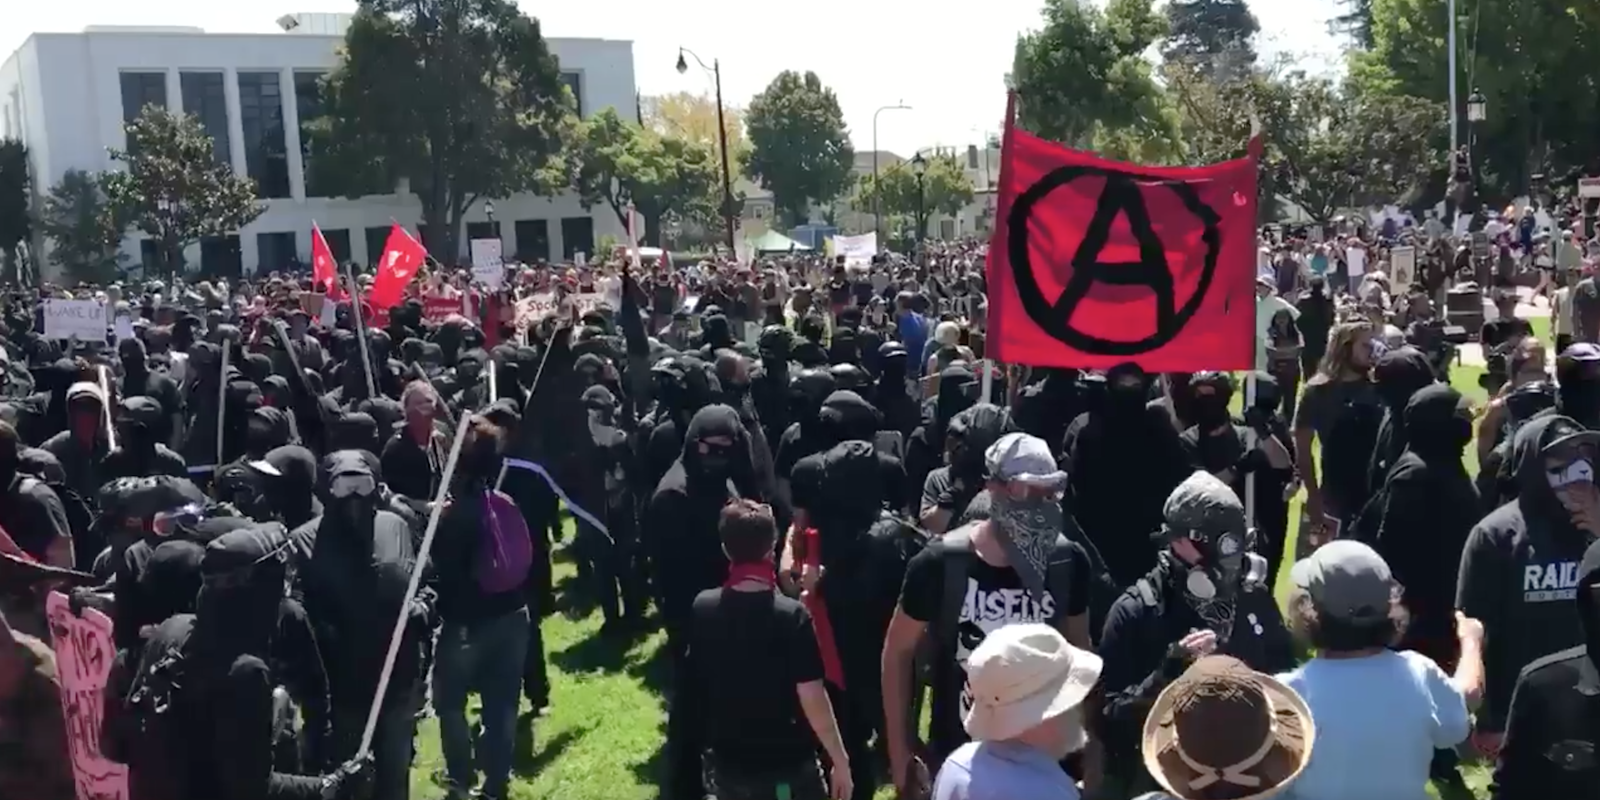 Antifa and anarchists protest in Berkeley, California.